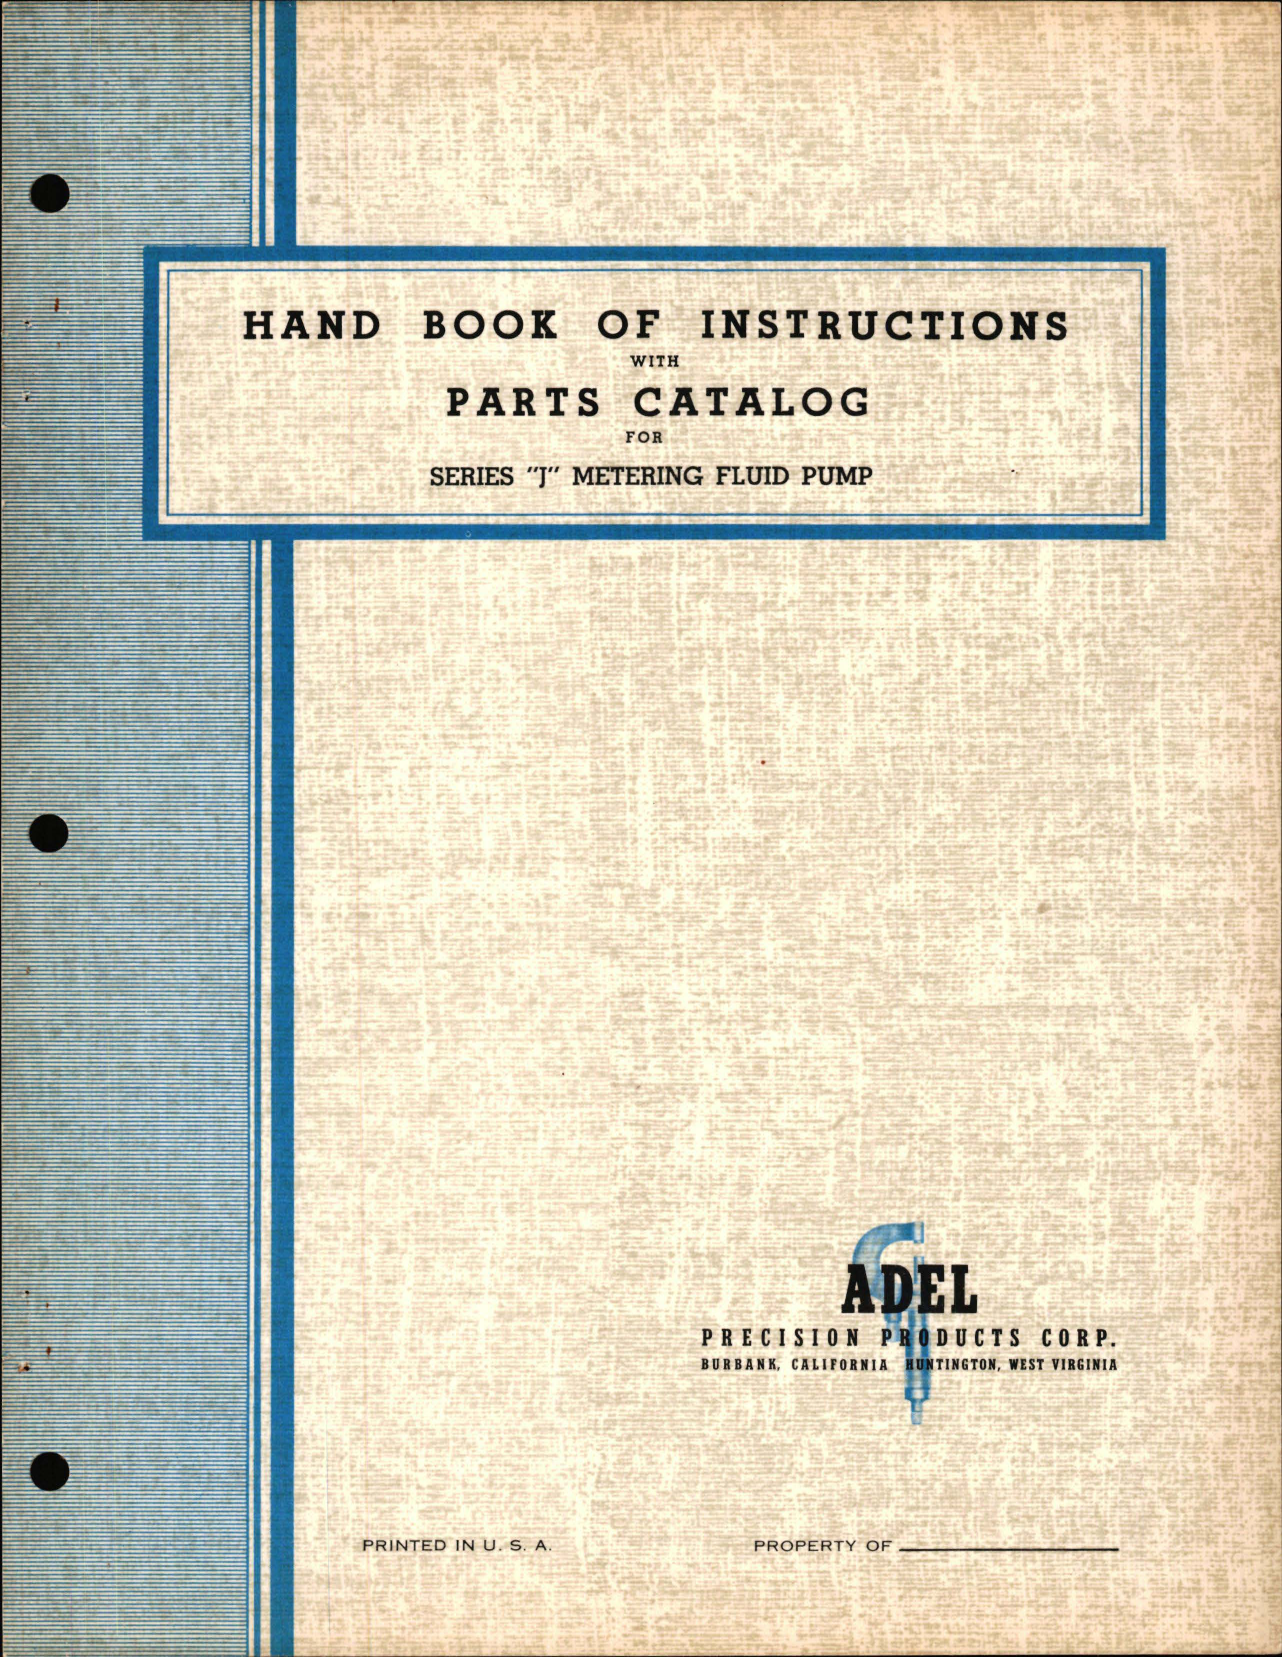 Sample page 1 from AirCorps Library document: Instructions with Parts Catalog for Metering Fluid Pump - Series J 